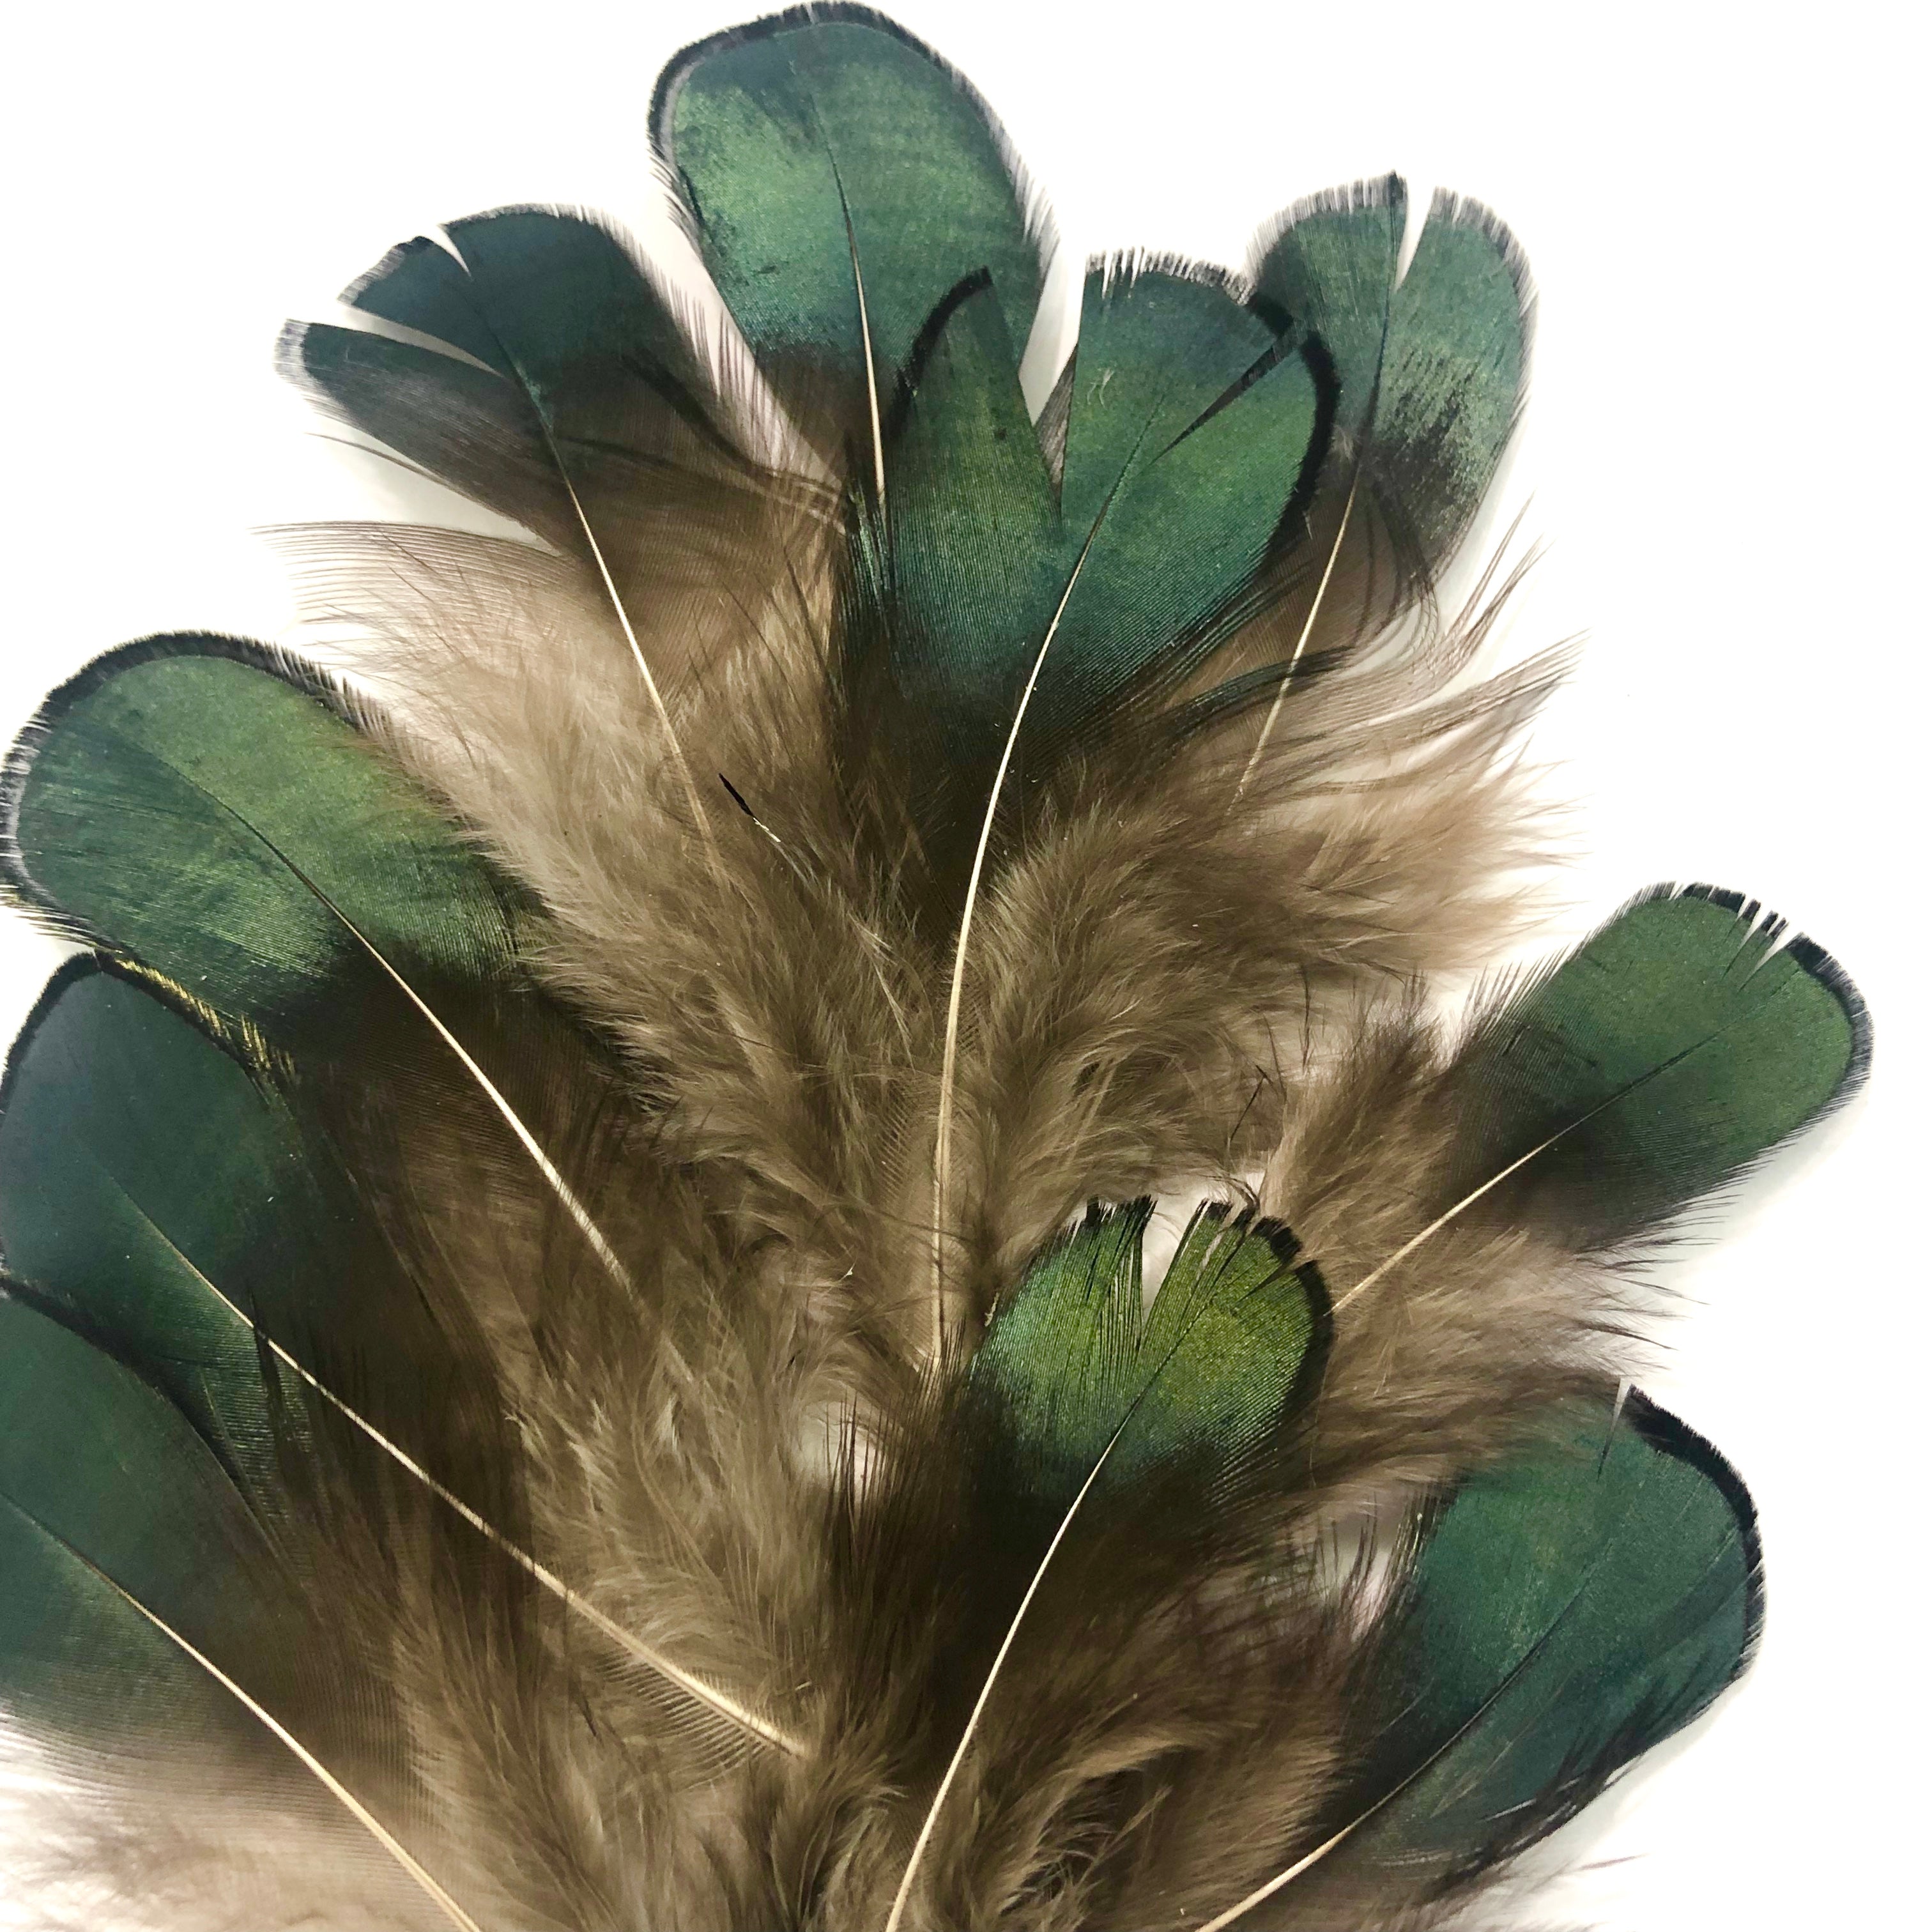 Natural Lady Amherst Jewel Pheasant Feather Plumage x 10pcs